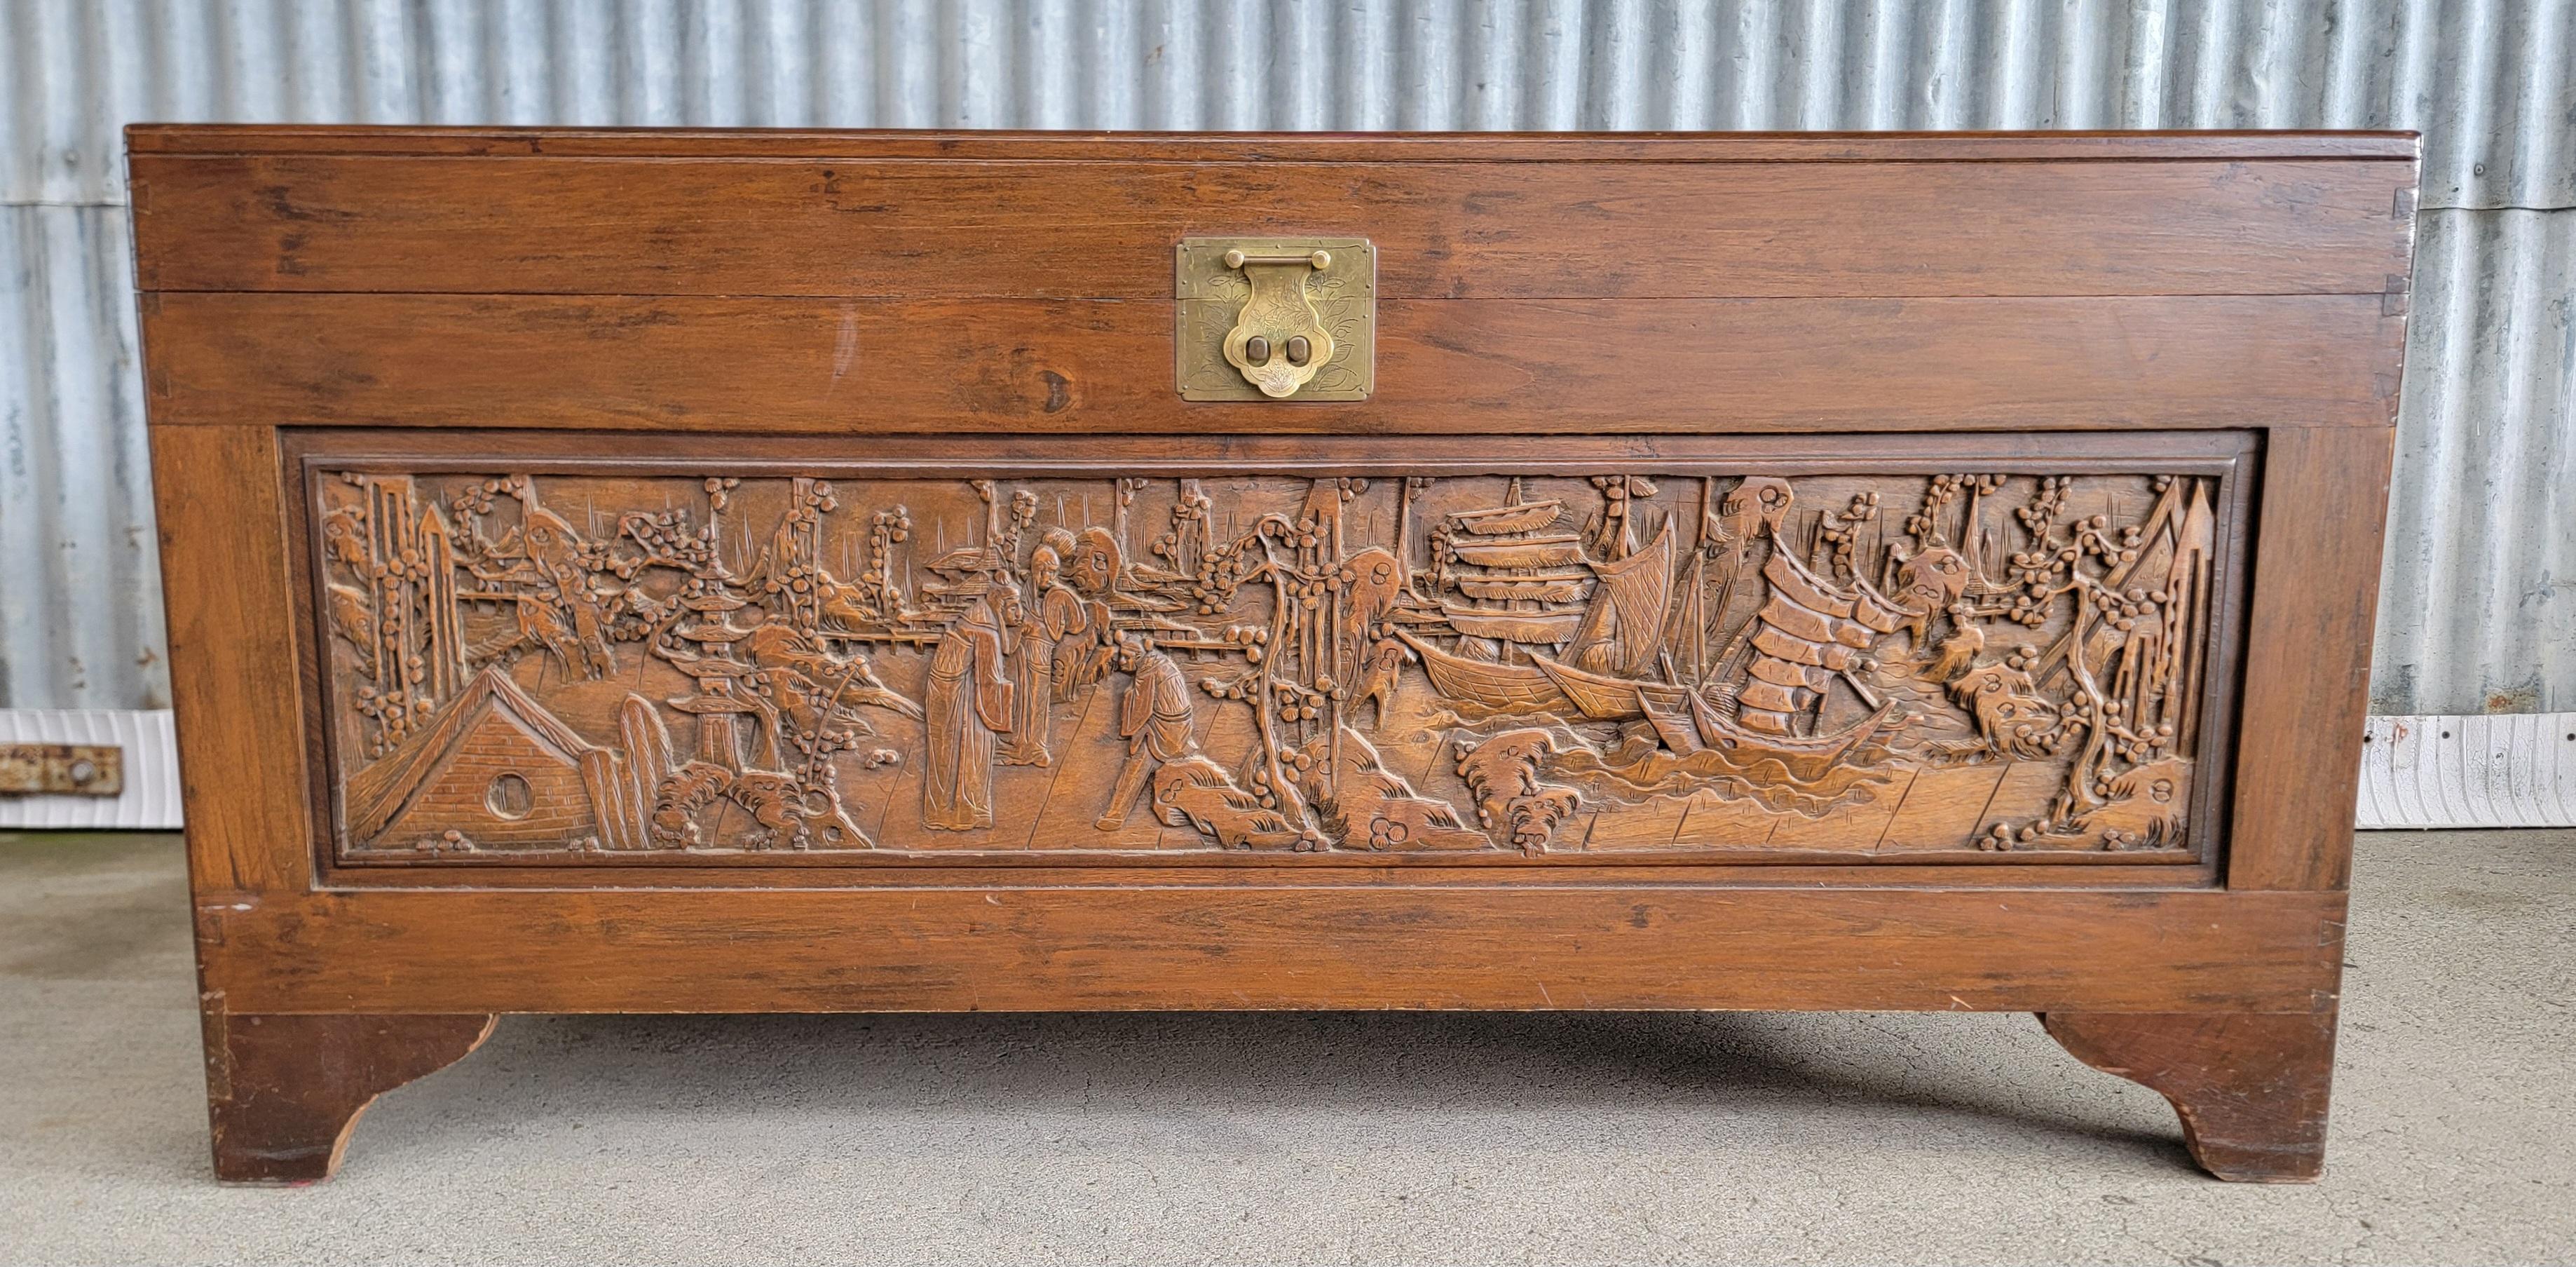 Highly carved camphor wood trunk / hope or blanket chest. Trees, figures and sail boat motif. Very nice original condition and finish. Brass hardware and latch. Small removable tray. Mid 20th Century. 